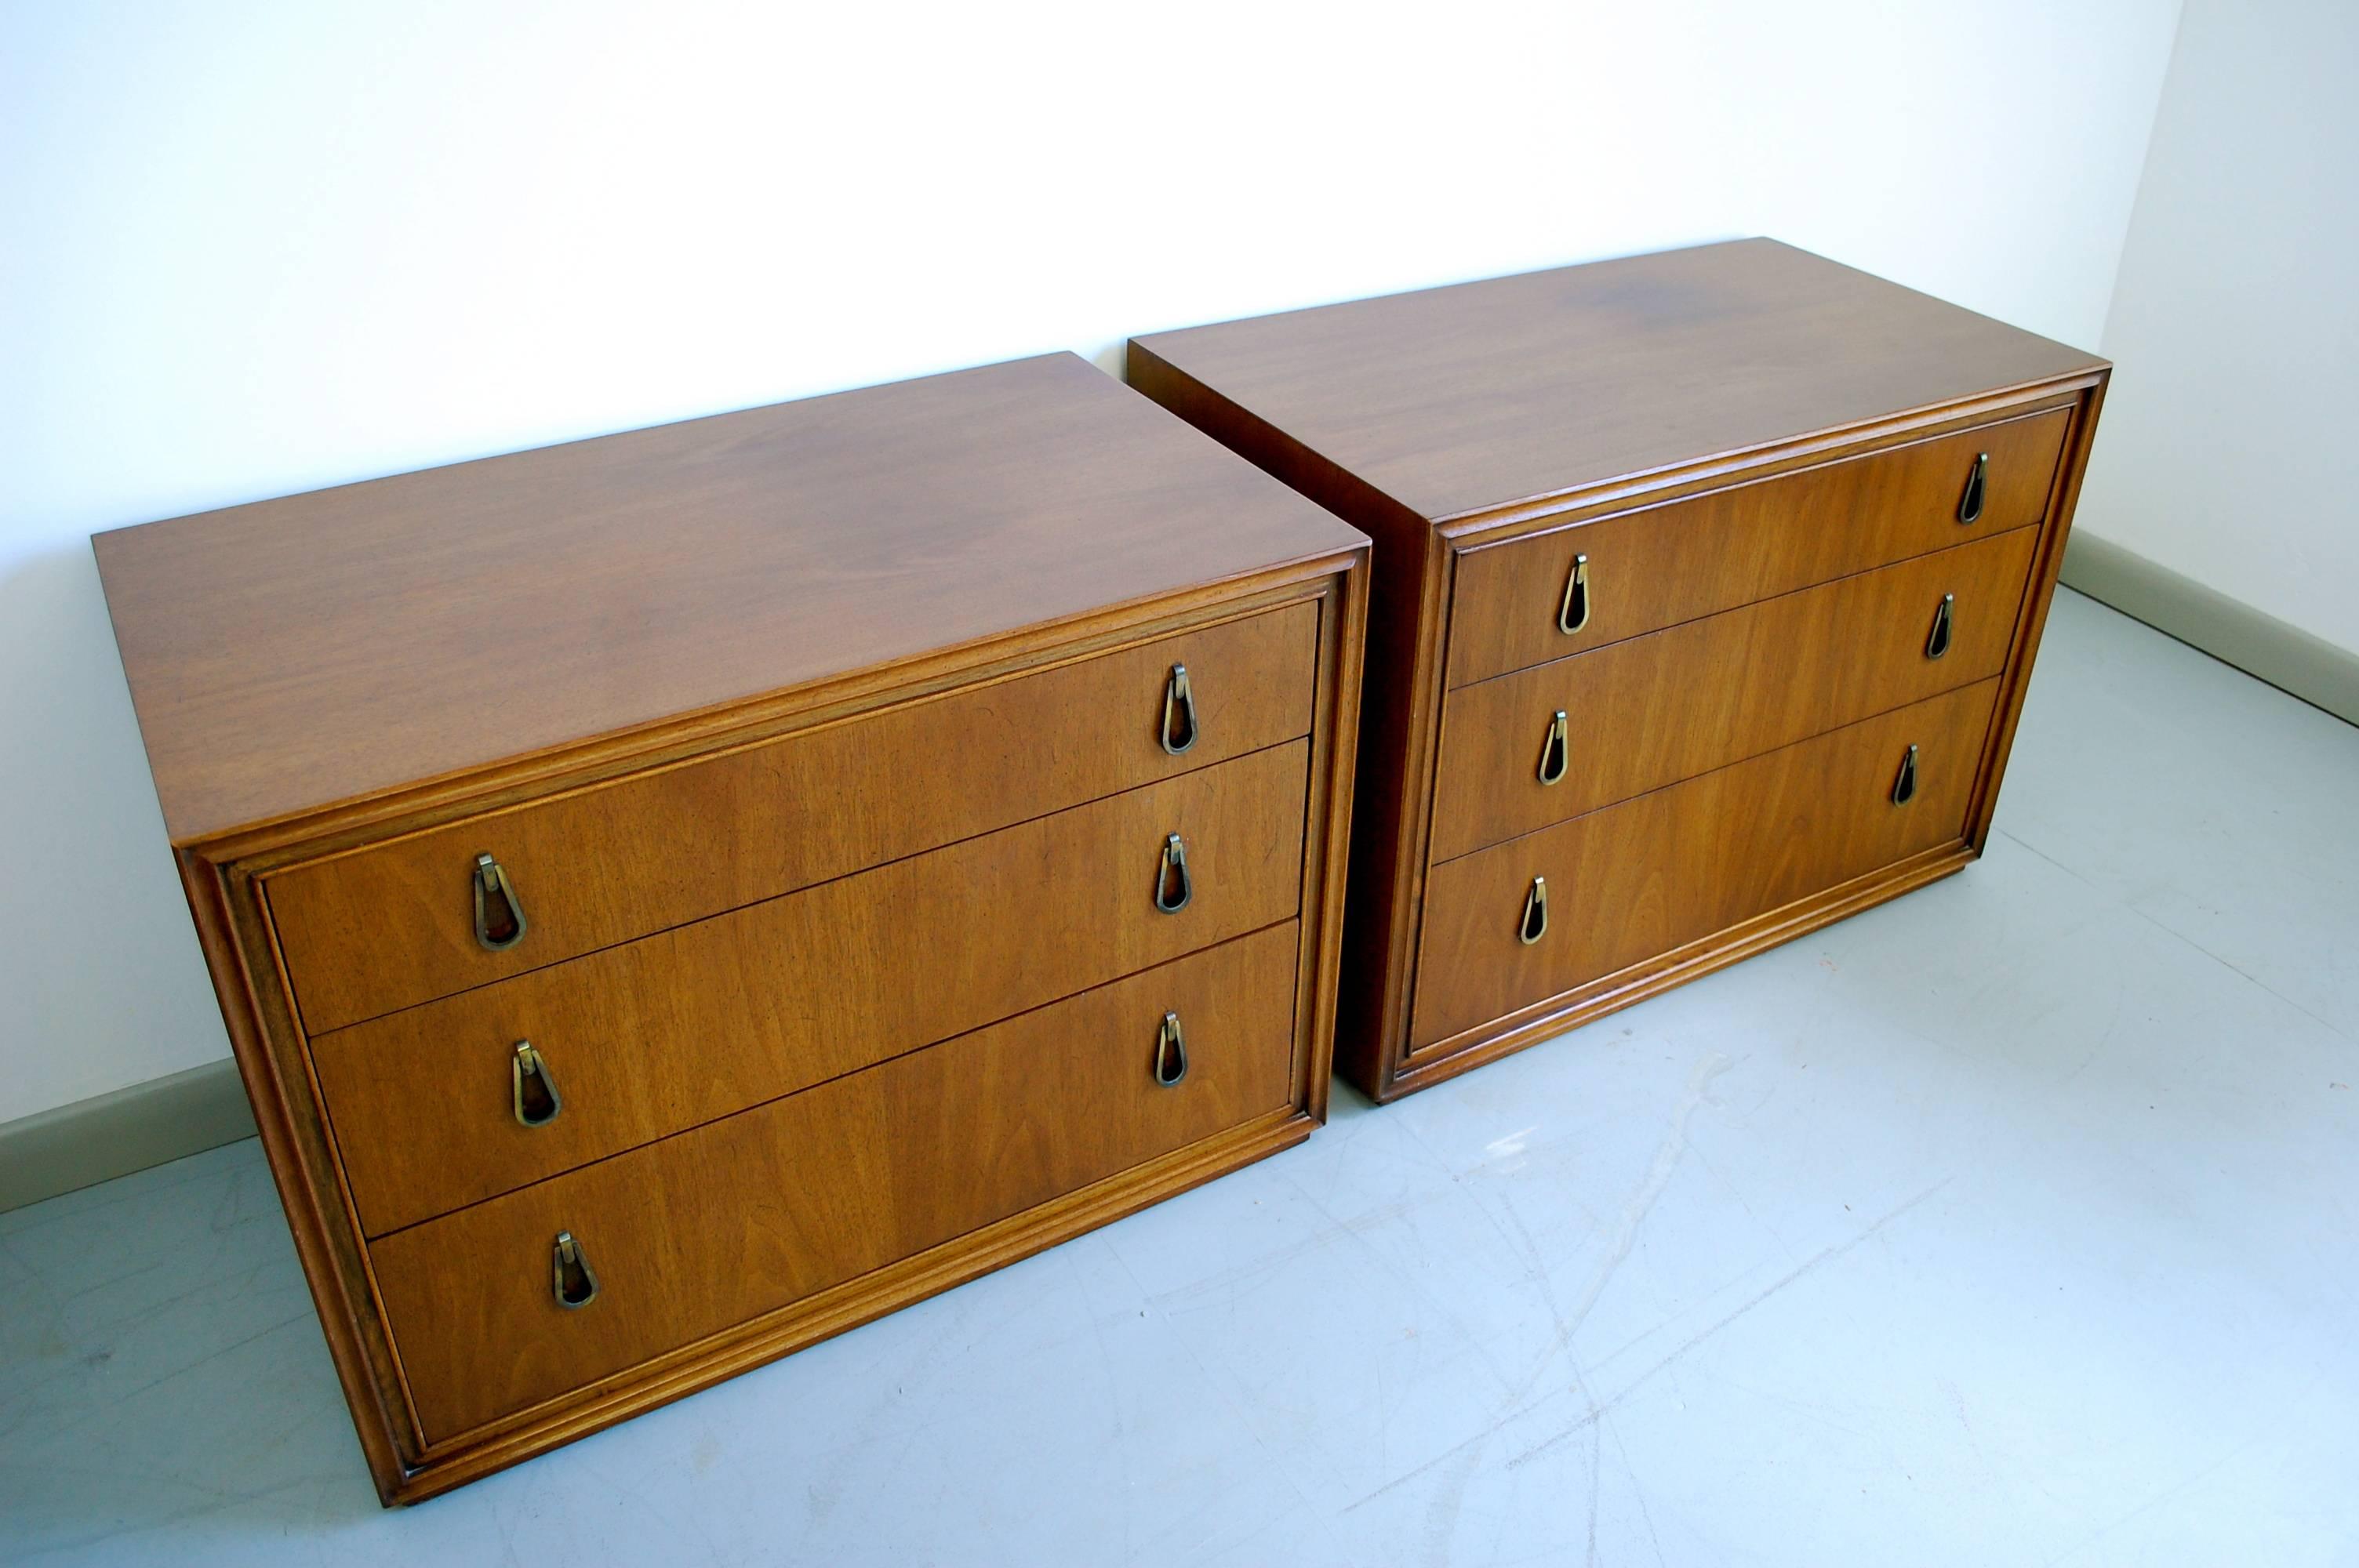 Sophisticated Mid-Century Modern nightstands by John Stuart for Mount Airy Furniture in walnut with gorgeous wood grain and handsome tear drop brass pulls with a beautiful patina.
   